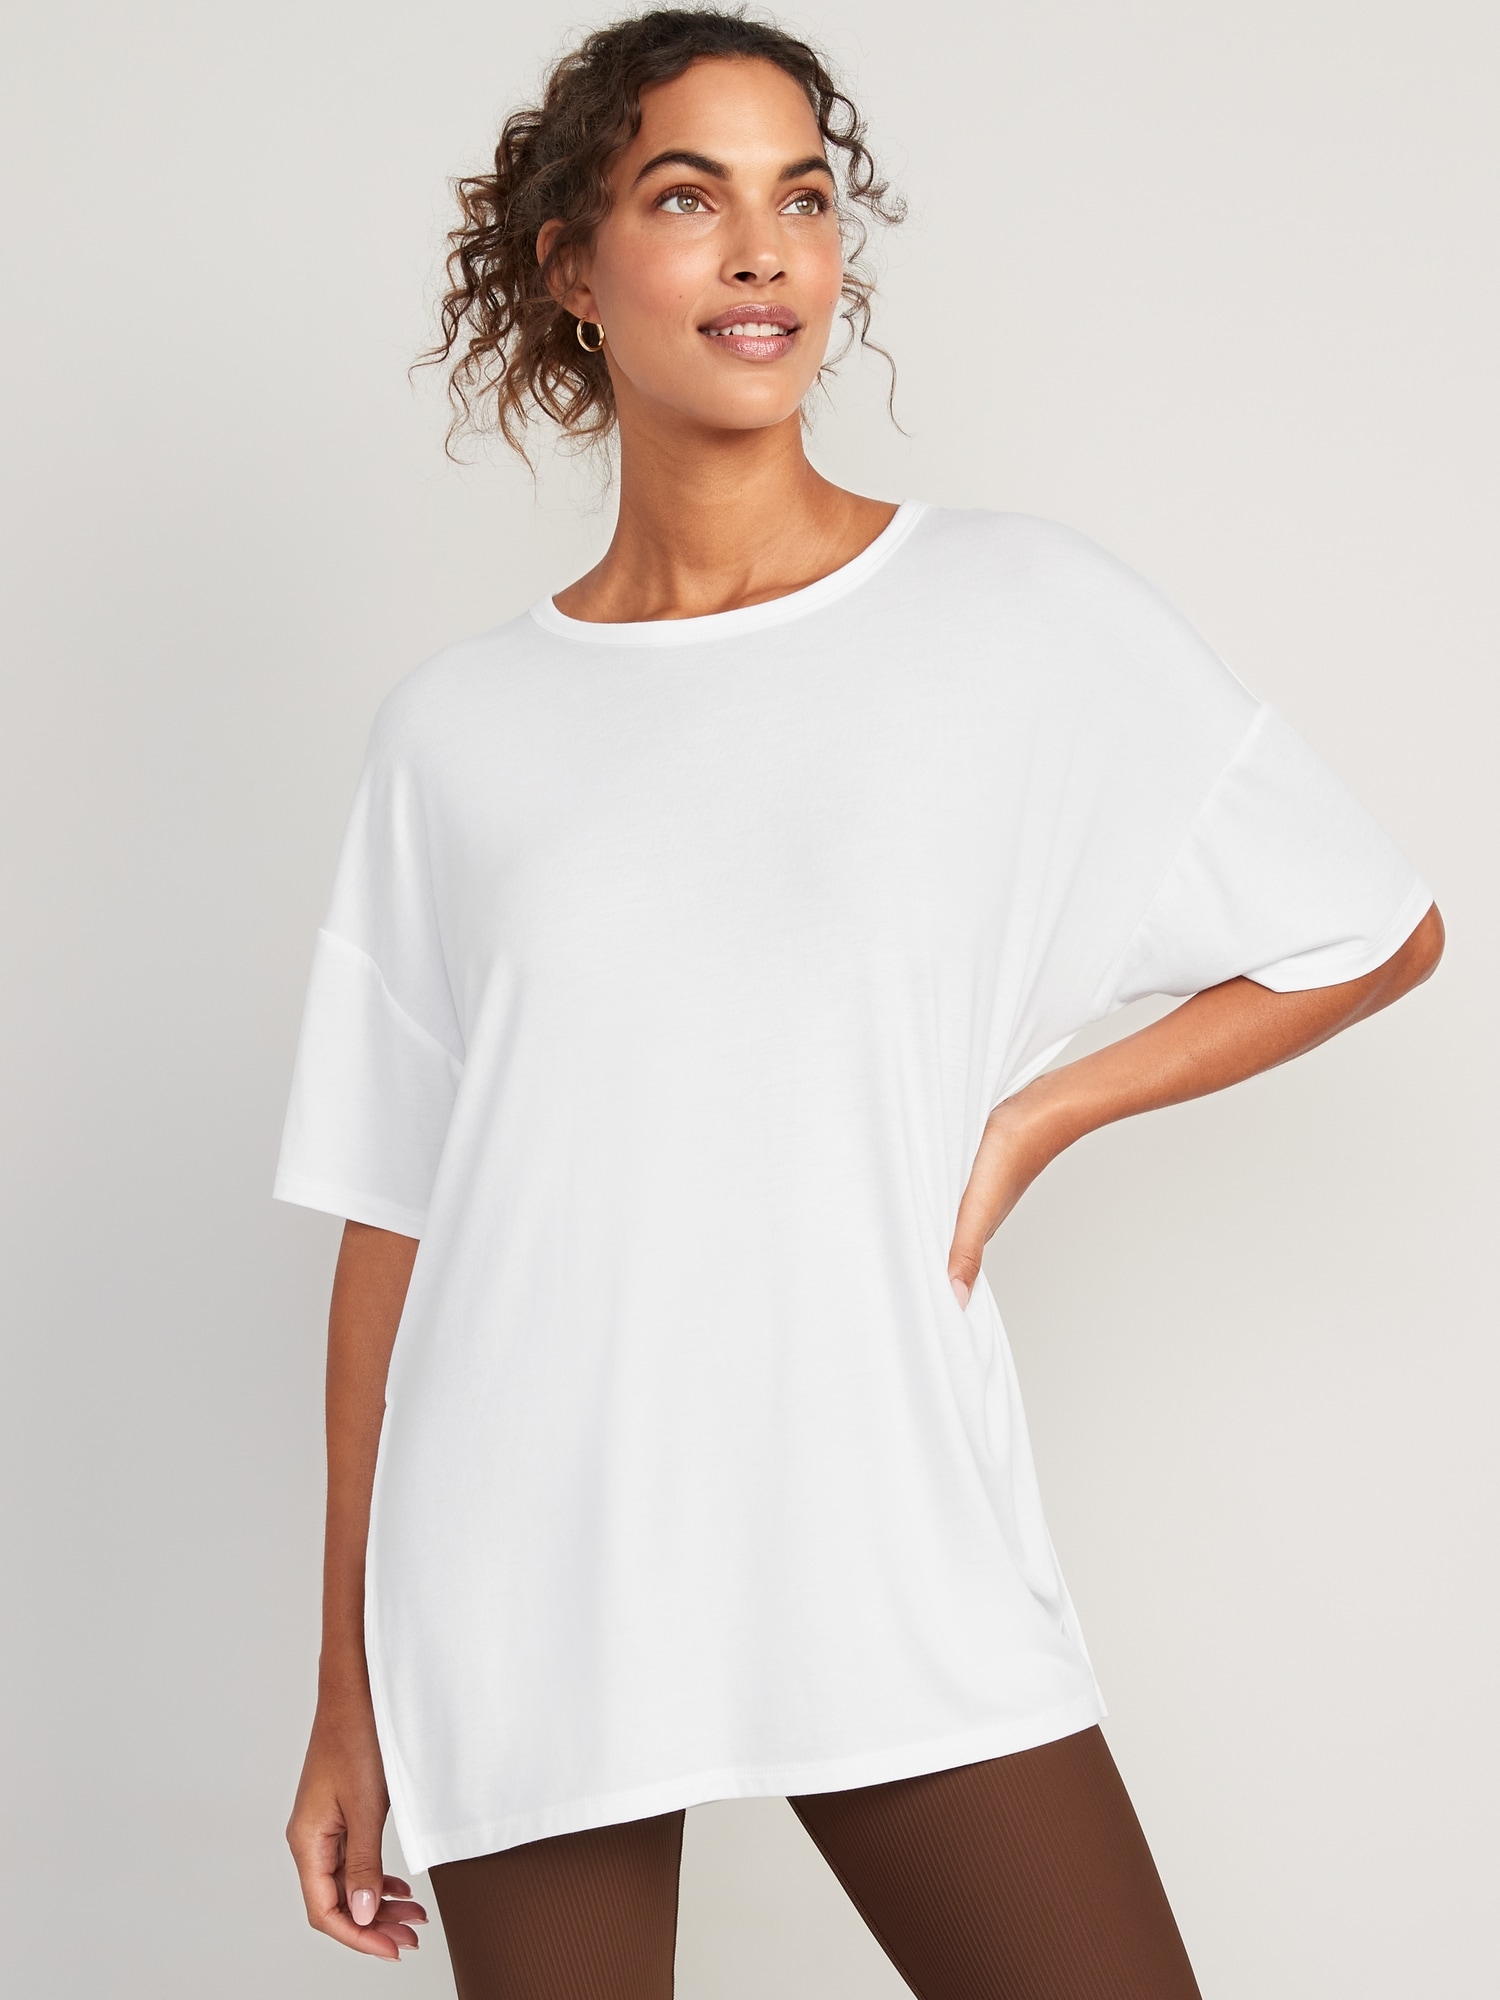 Oversized UltraLite All-Day Tunic for | Navy